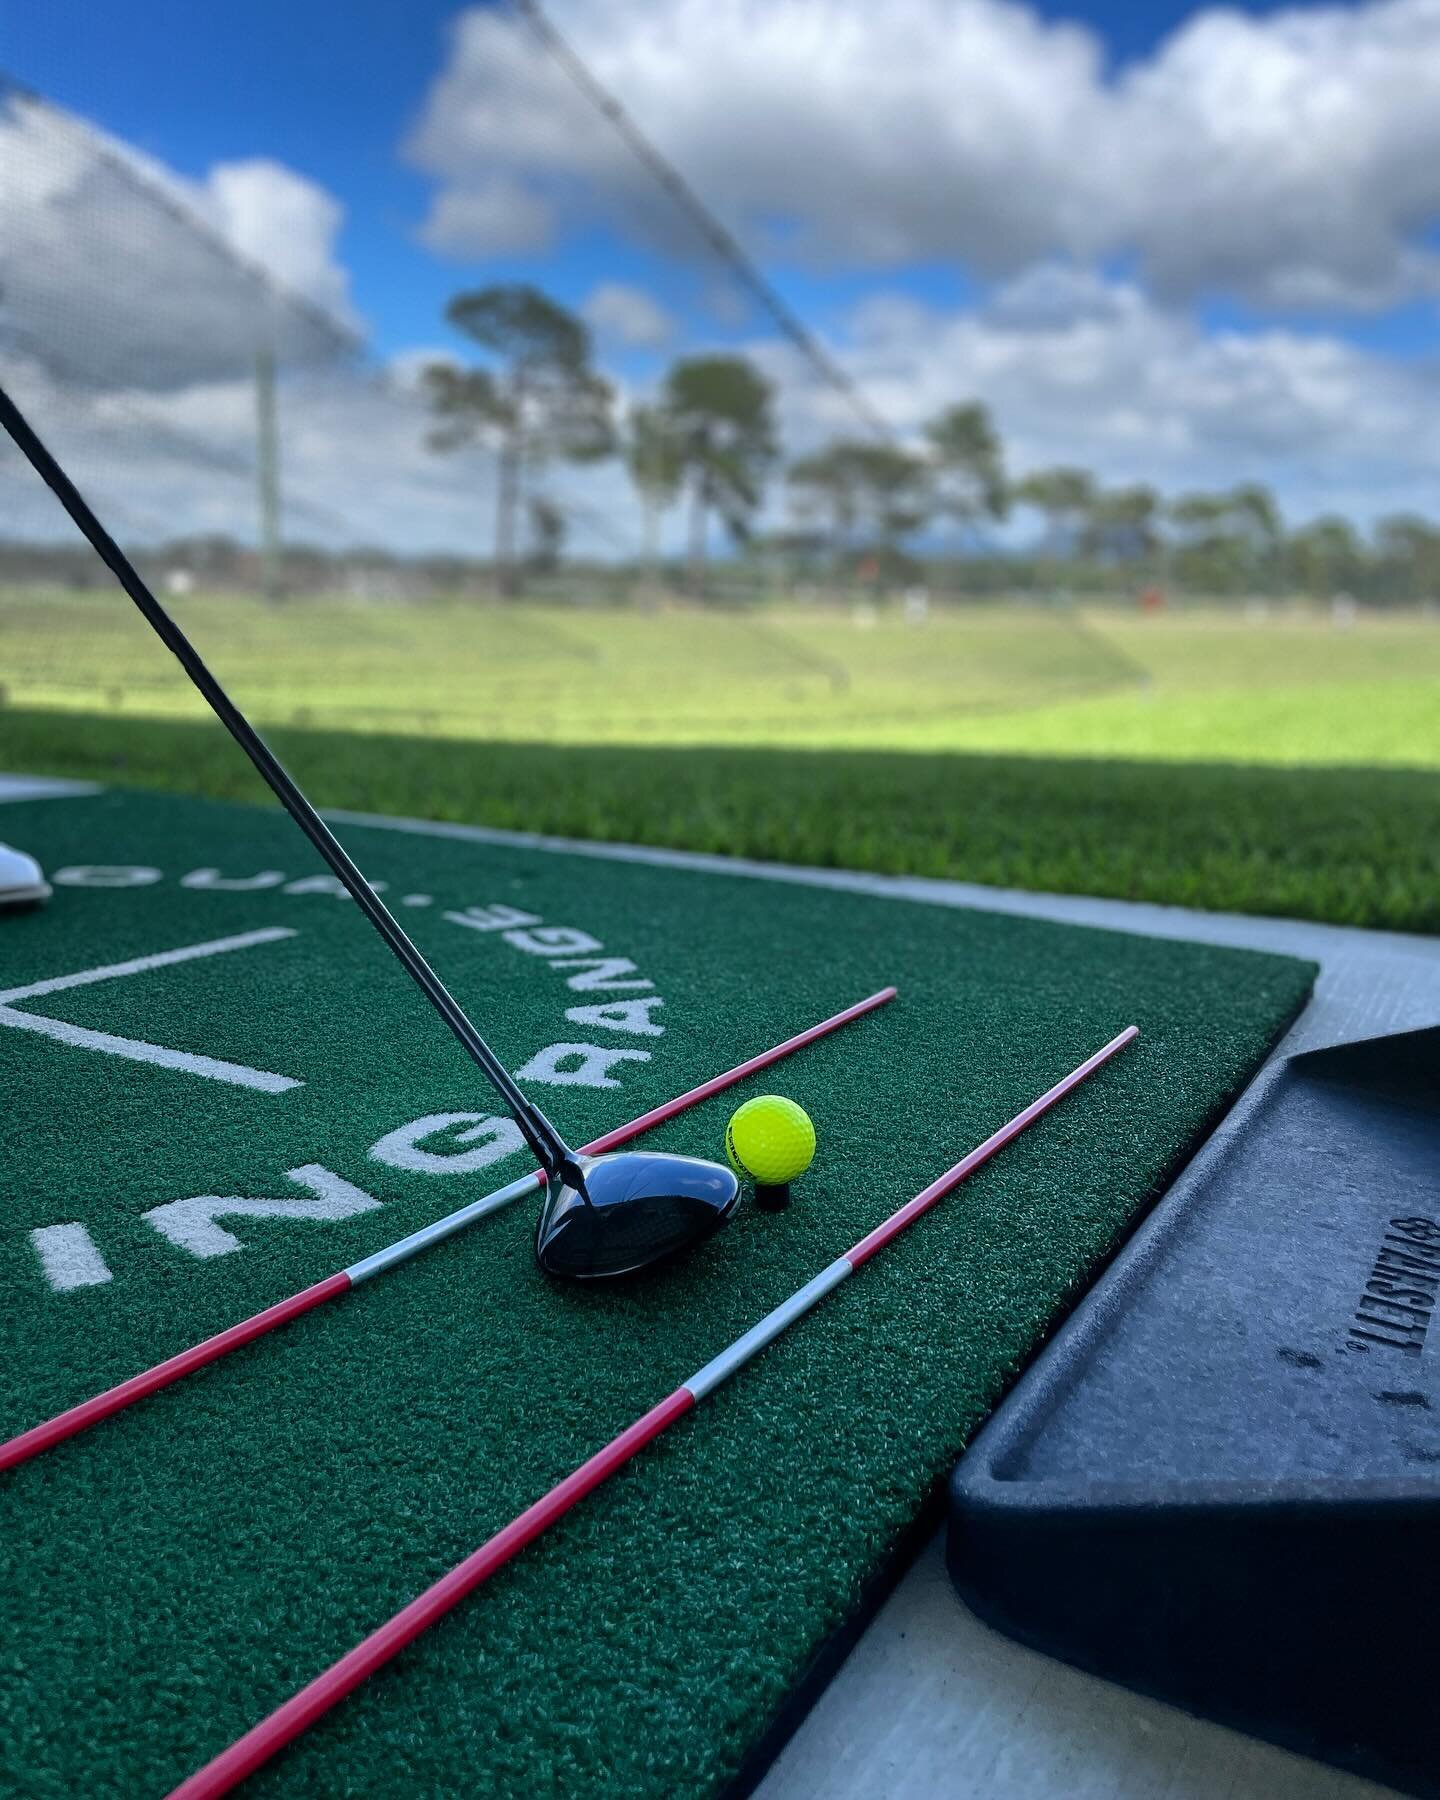 Whether you have your own drills to work on or it&rsquo;s time to book a lesson, we have you covered. 

✅ 4 Different bucket sizes 
✅ Premium mats
✅ Top Tracer 
✅ TrackMan hire
✅ Short game area

#golf #drivingrange #range #trackman #toptracer #pract